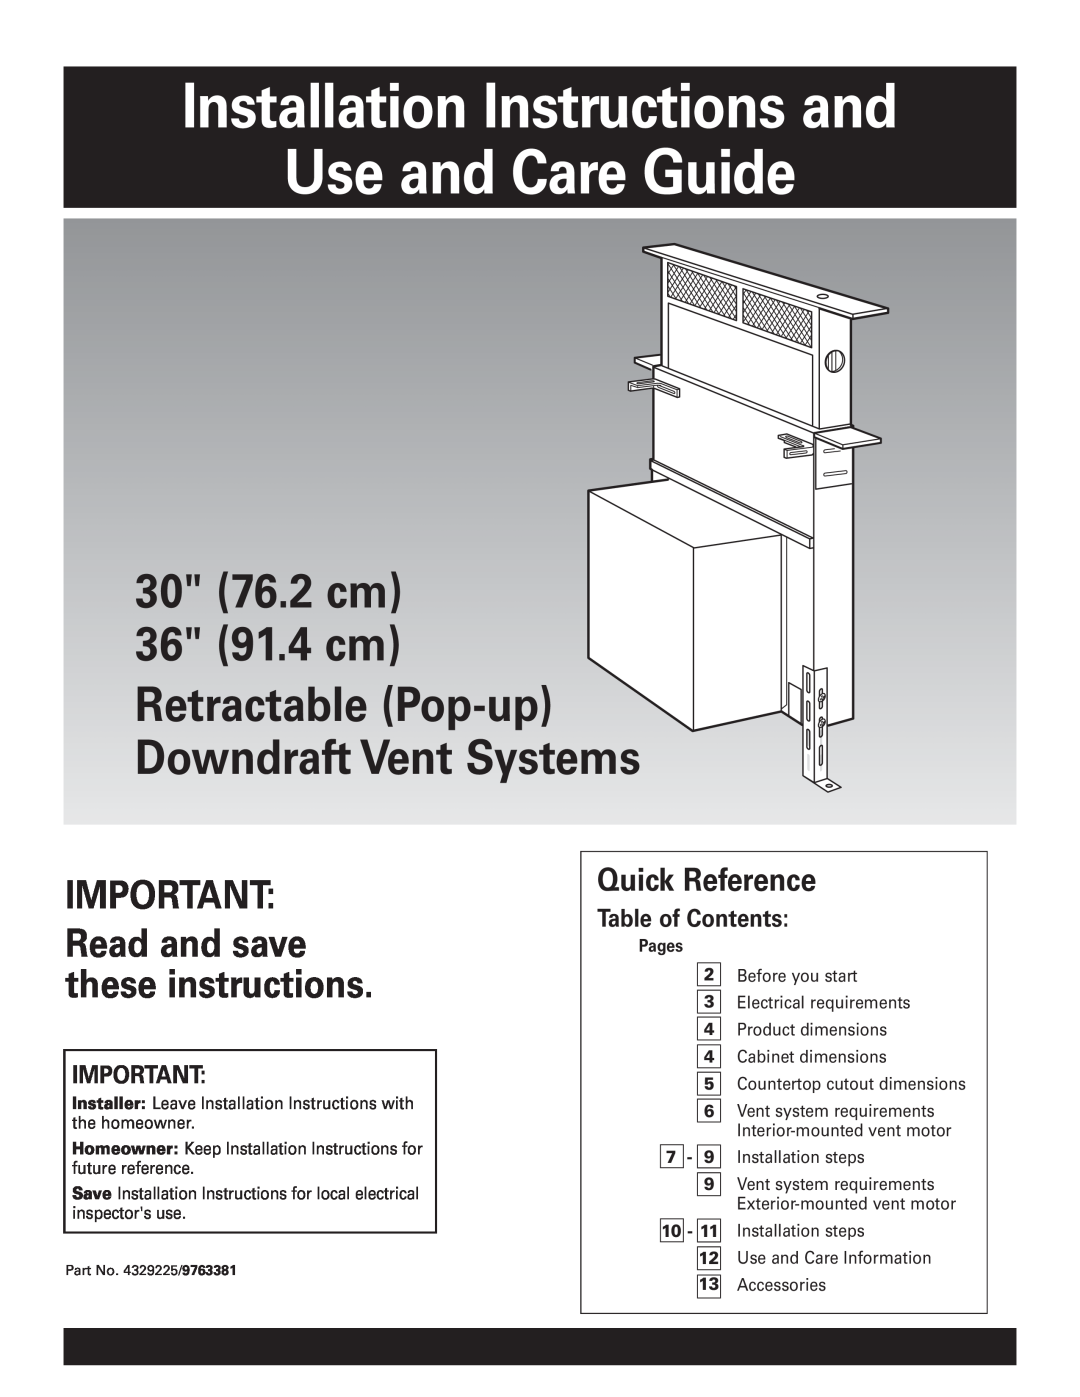 KitchenAid KPEU722M installation instructions Installation Instructions and Use and Care Guide, Quick Reference, Pages 